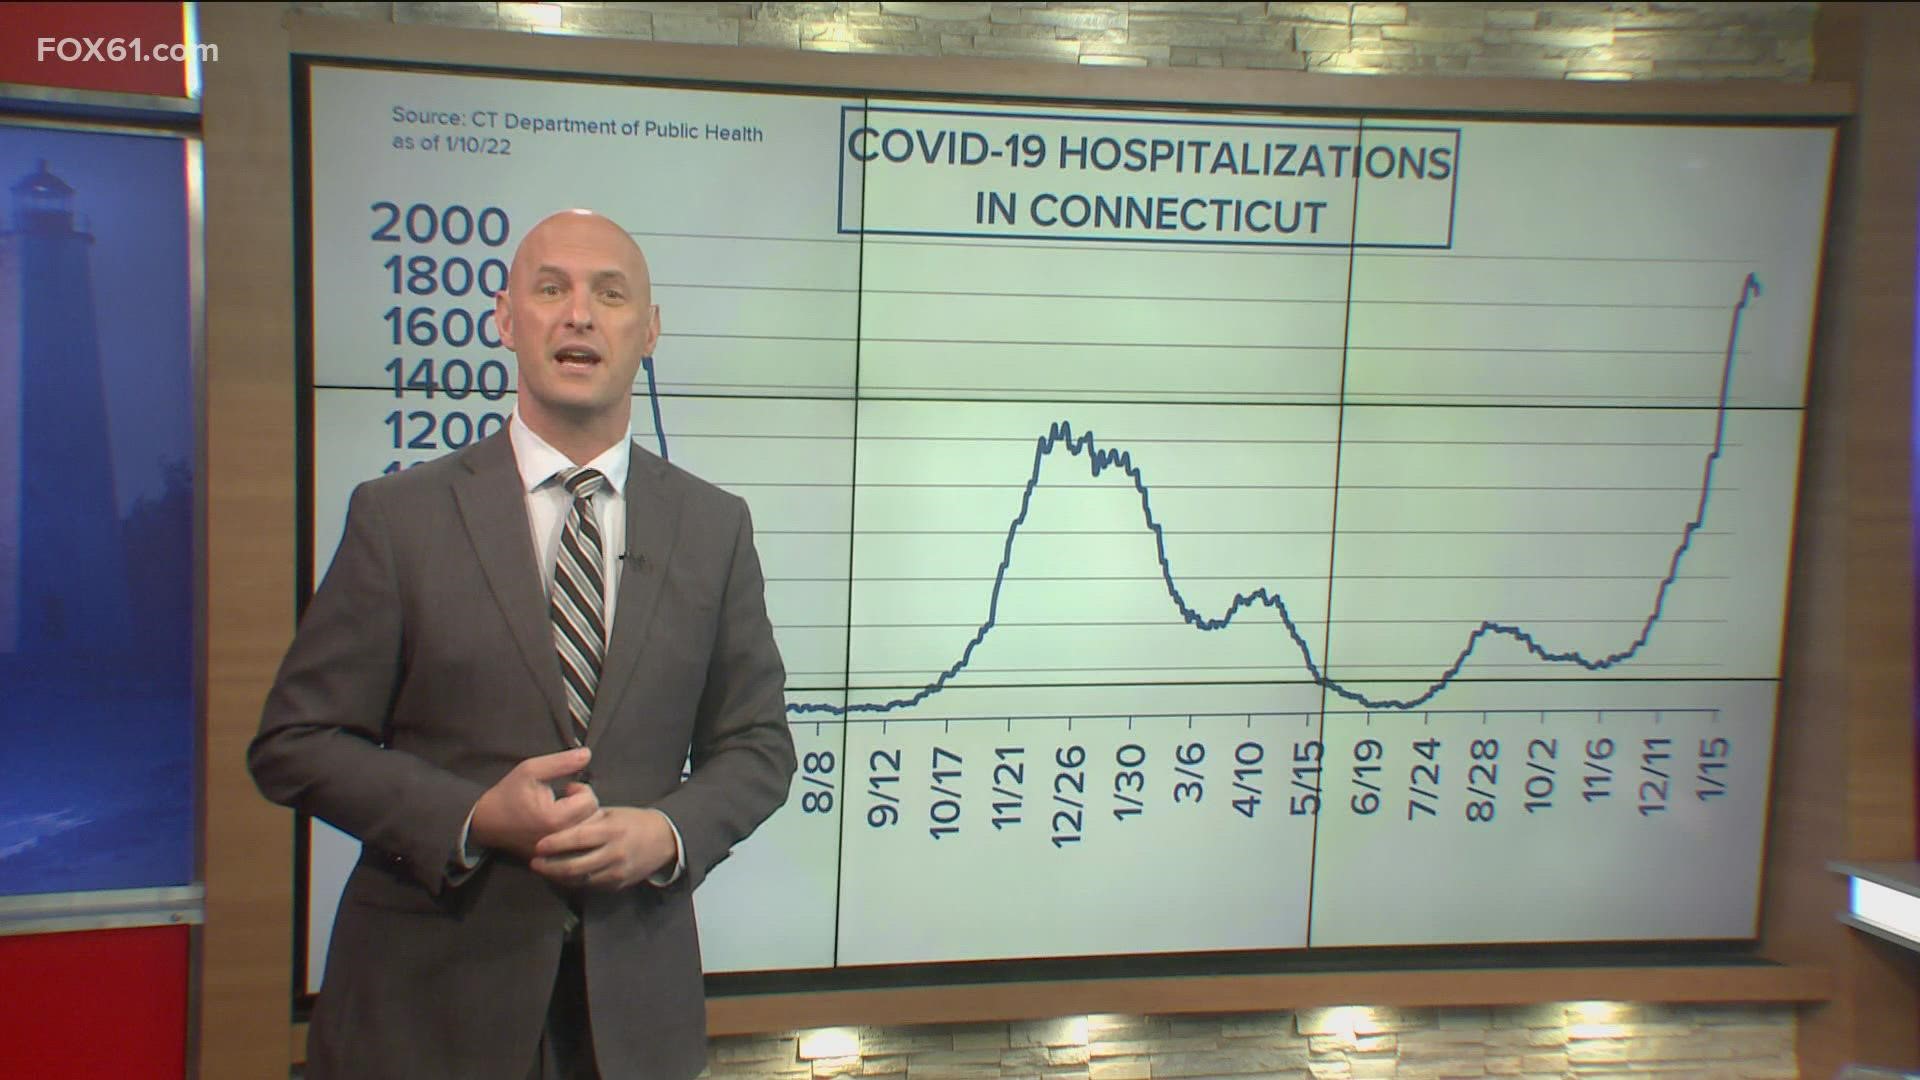 FOX61's Tim Lammers goes over the latest COVID-19 data for Connecticut.